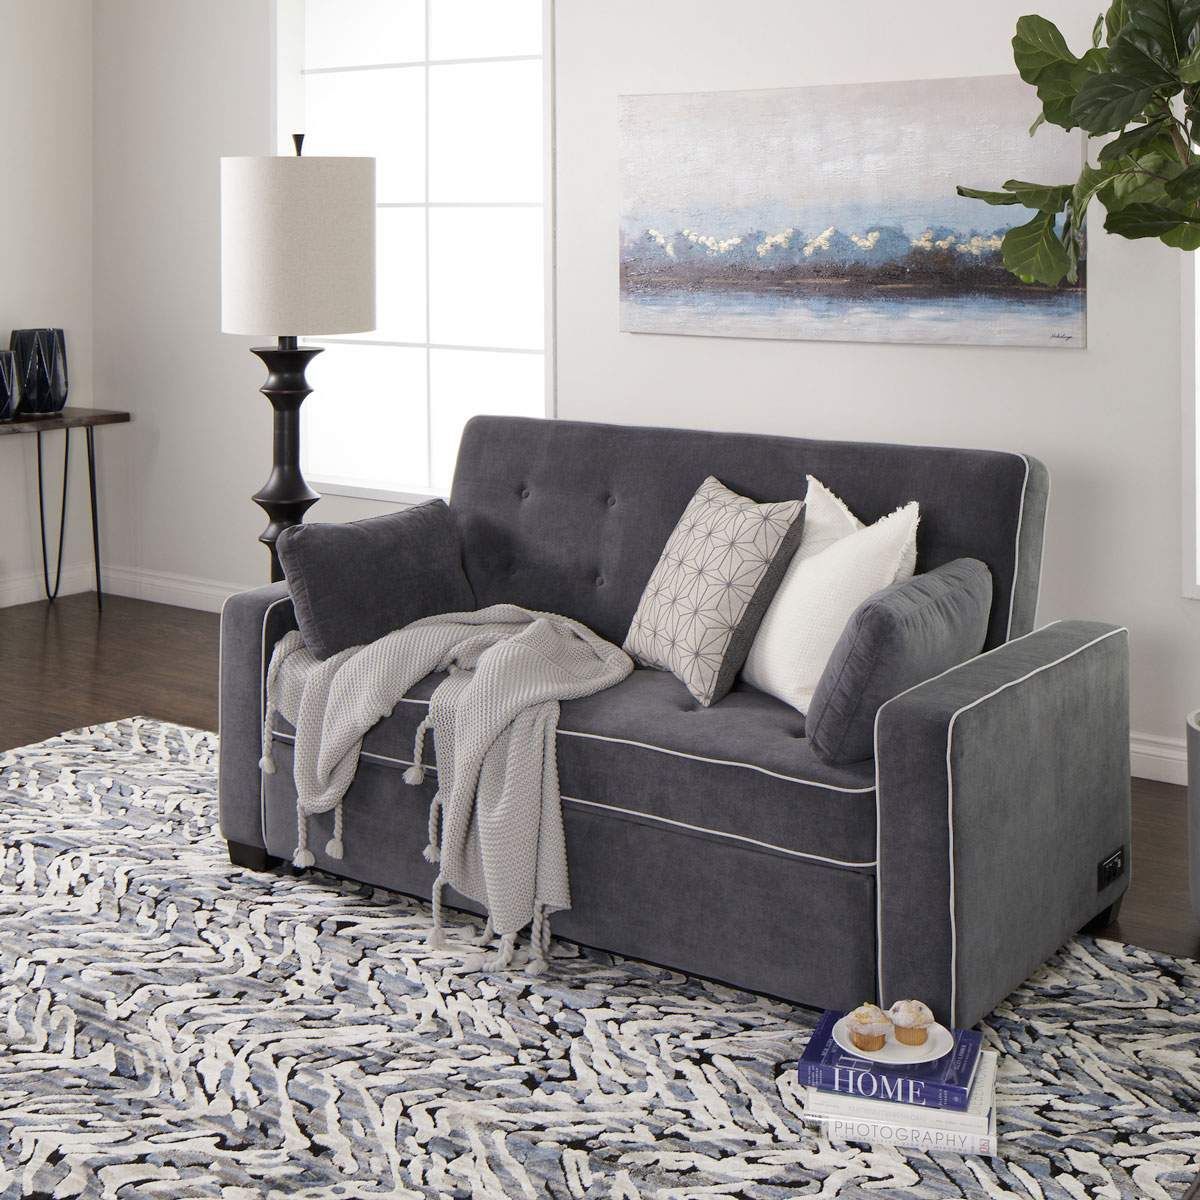 Grey Queen Pull Out Sleeper Sofa With Usb Port | Jerome's Furniture Inside 3 In 1 Gray Pull Out Sleeper Sofas (View 4 of 20)